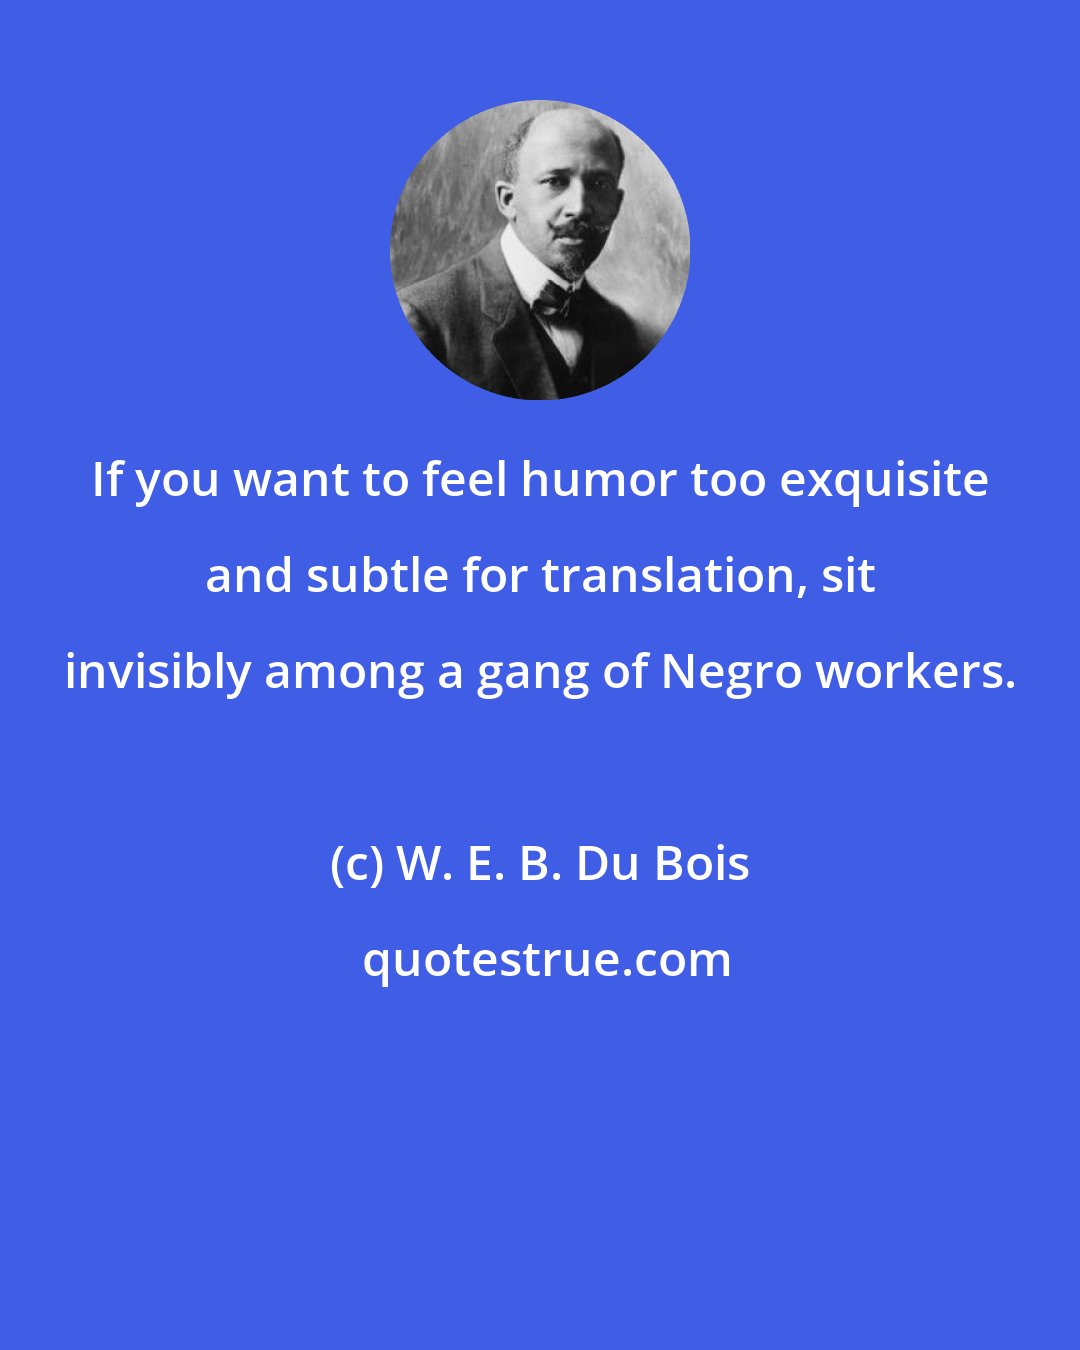 W. E. B. Du Bois: If you want to feel humor too exquisite and subtle for translation, sit invisibly among a gang of Negro workers.